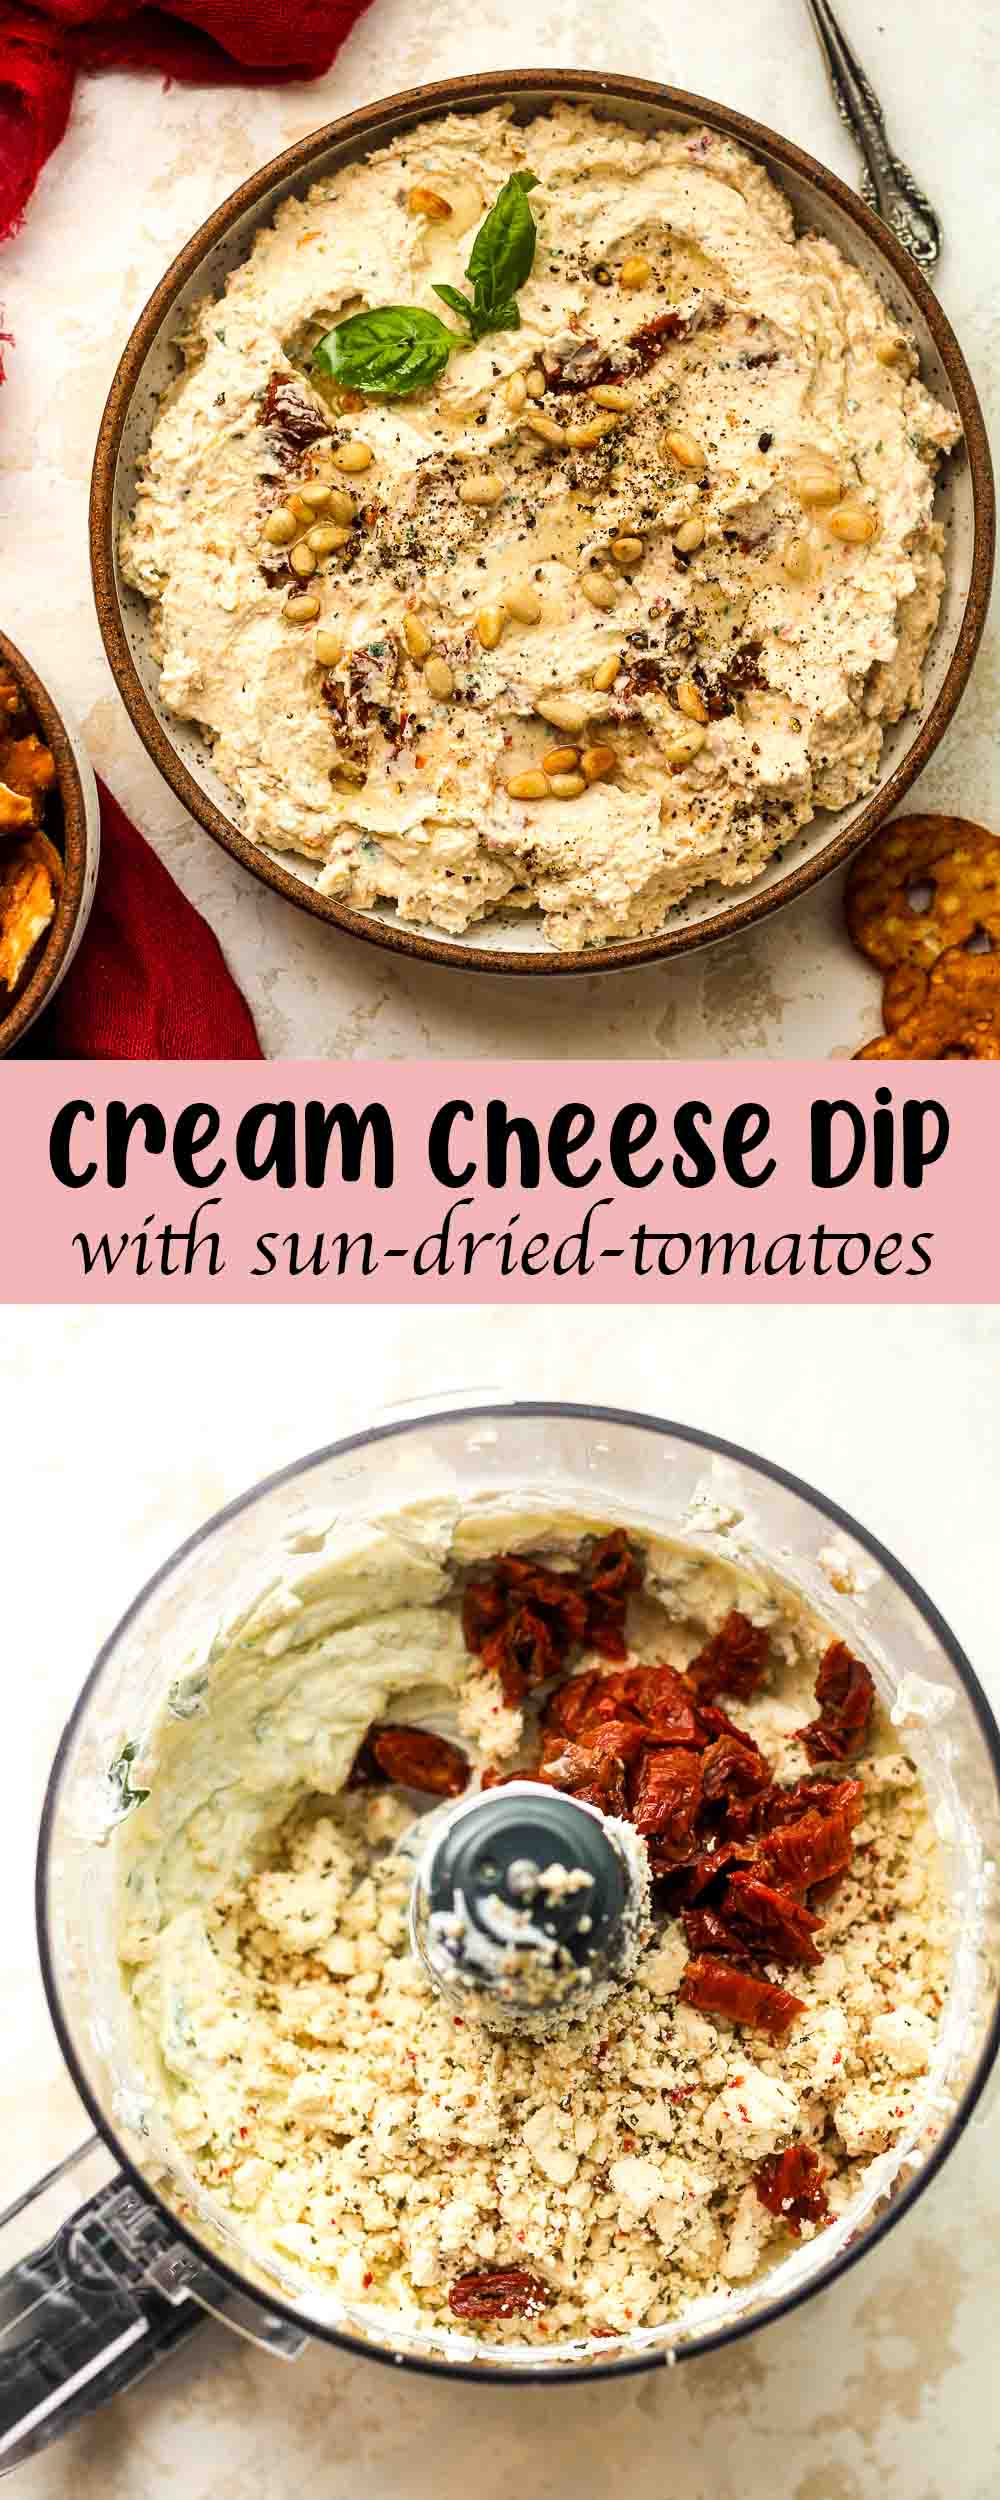 A collage of photos - a bowl of the cream cheese dip and a food processor of the ingredients.